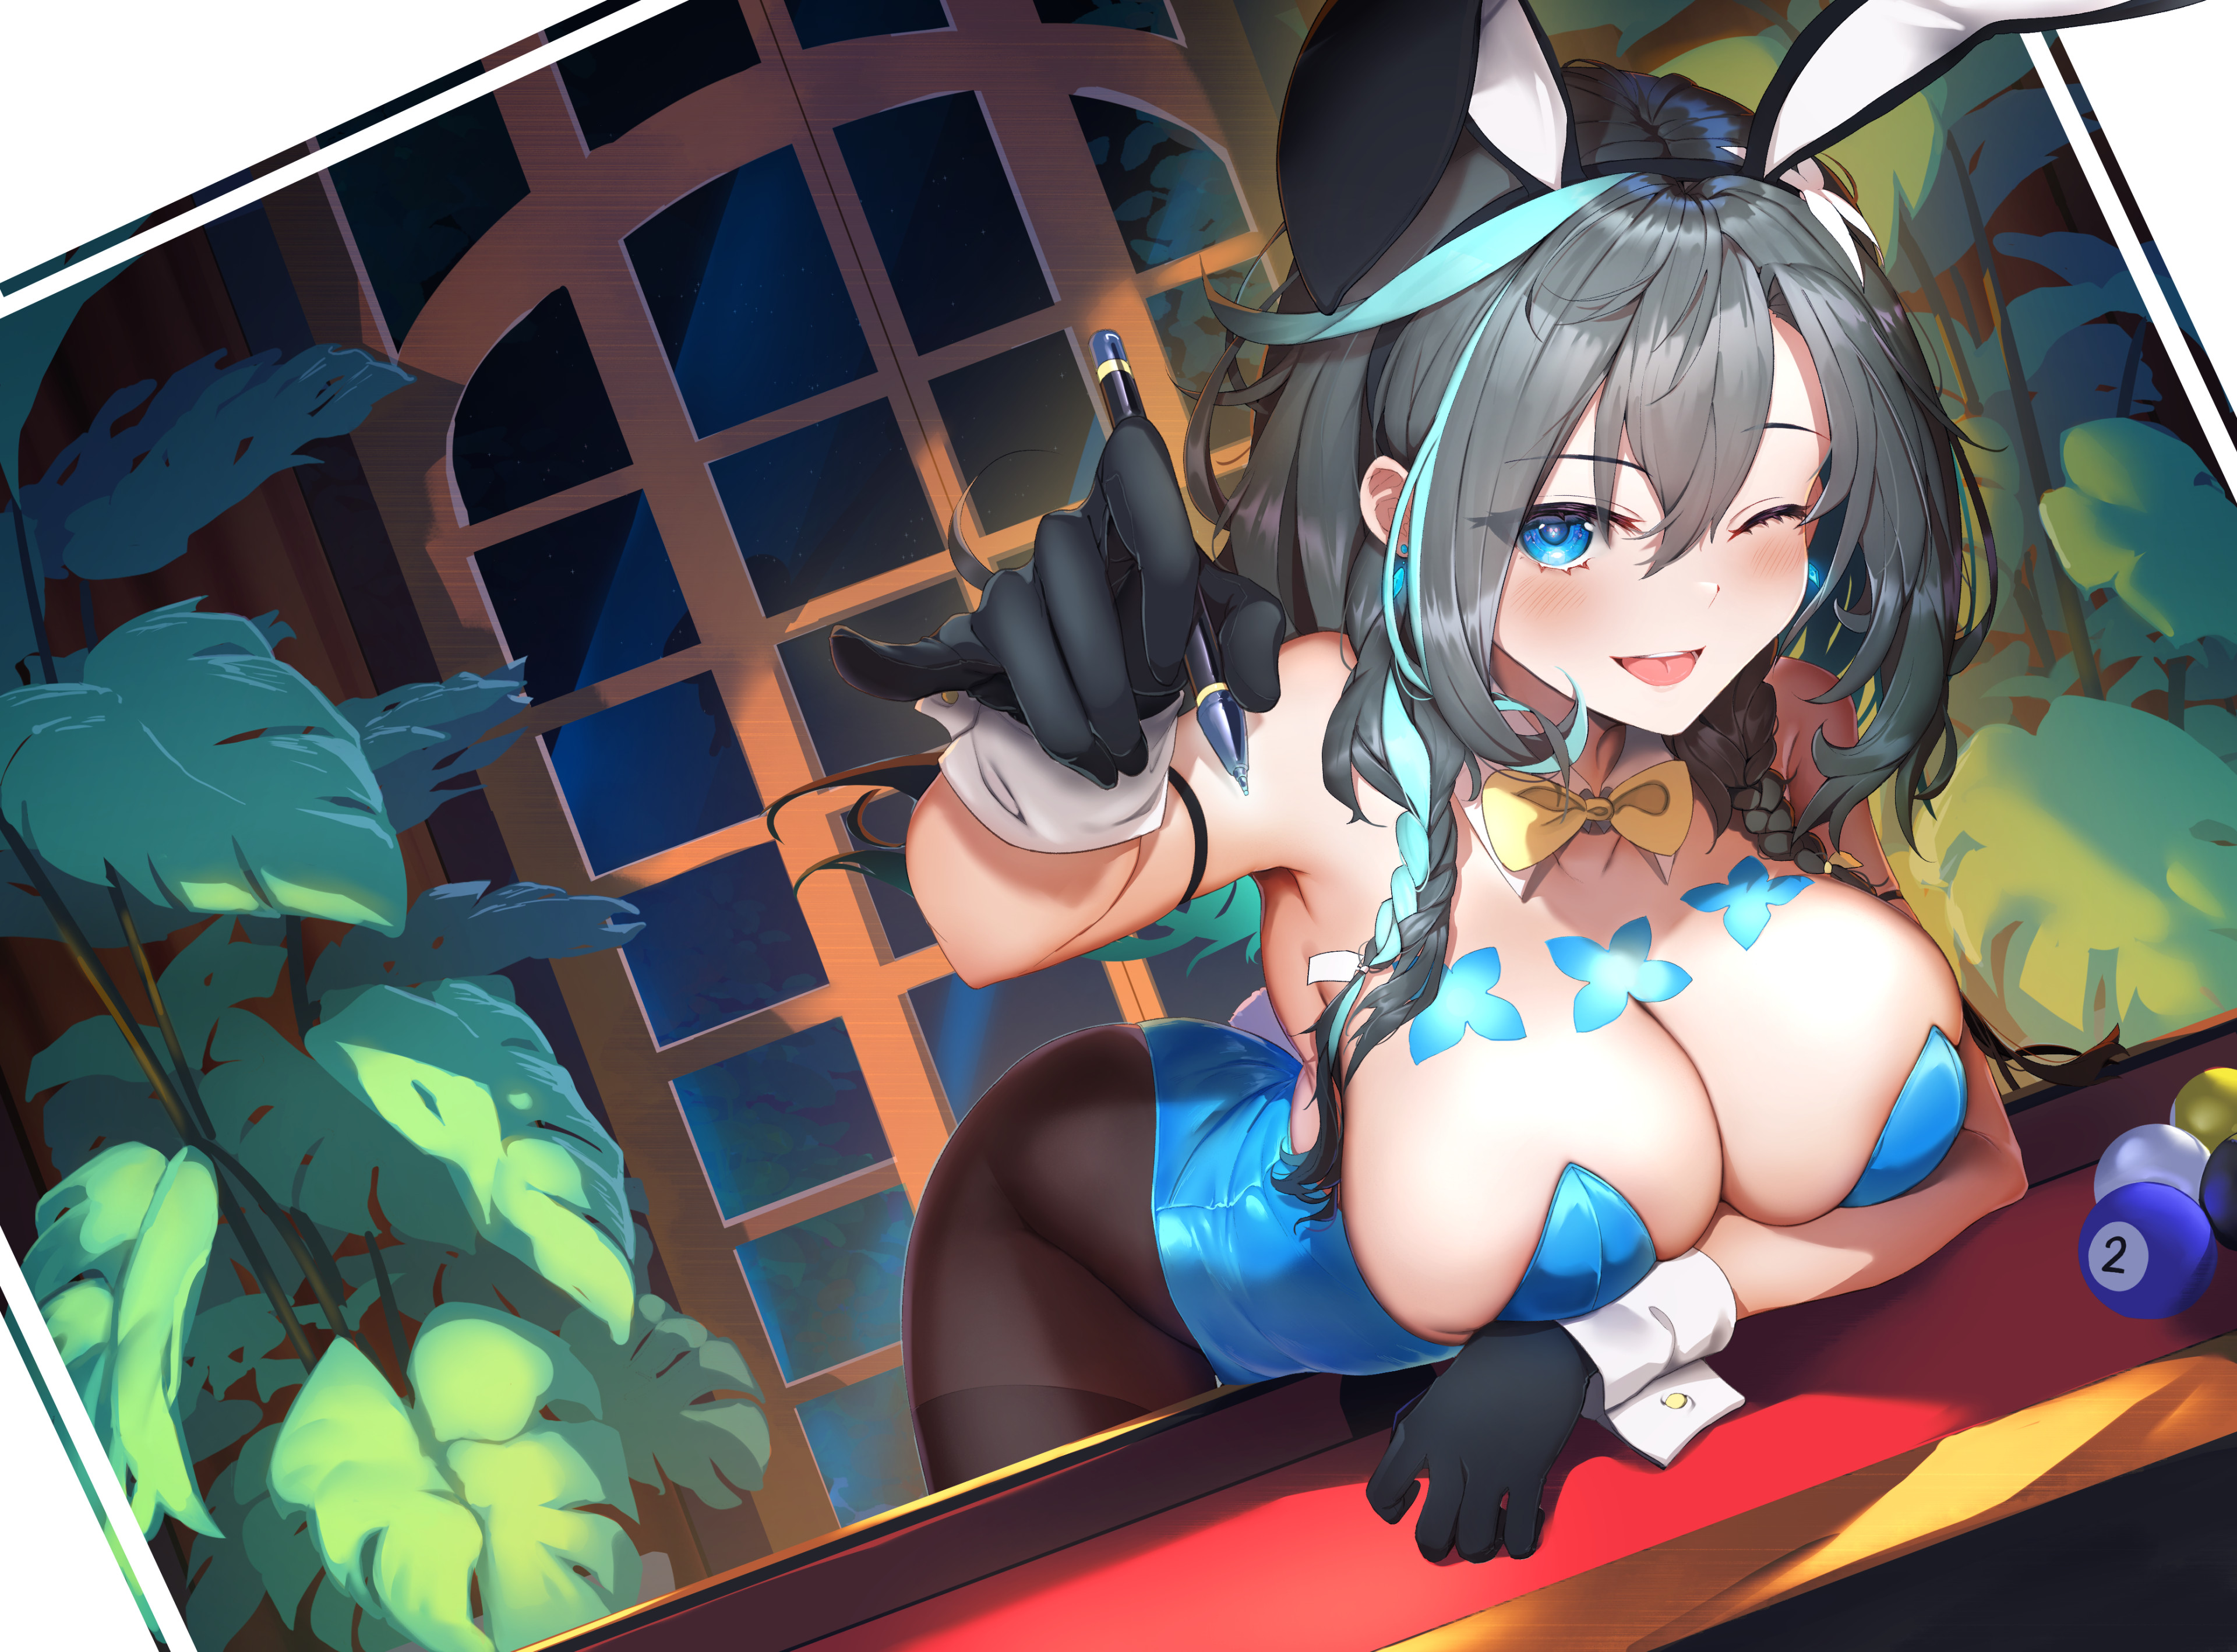 Anime 3840x2836 anime anime girls bunny suit bunny ears bunny tail big boobs one eye closed gloves braids two tone hair pens billiard balls pool table blushing bent over plants